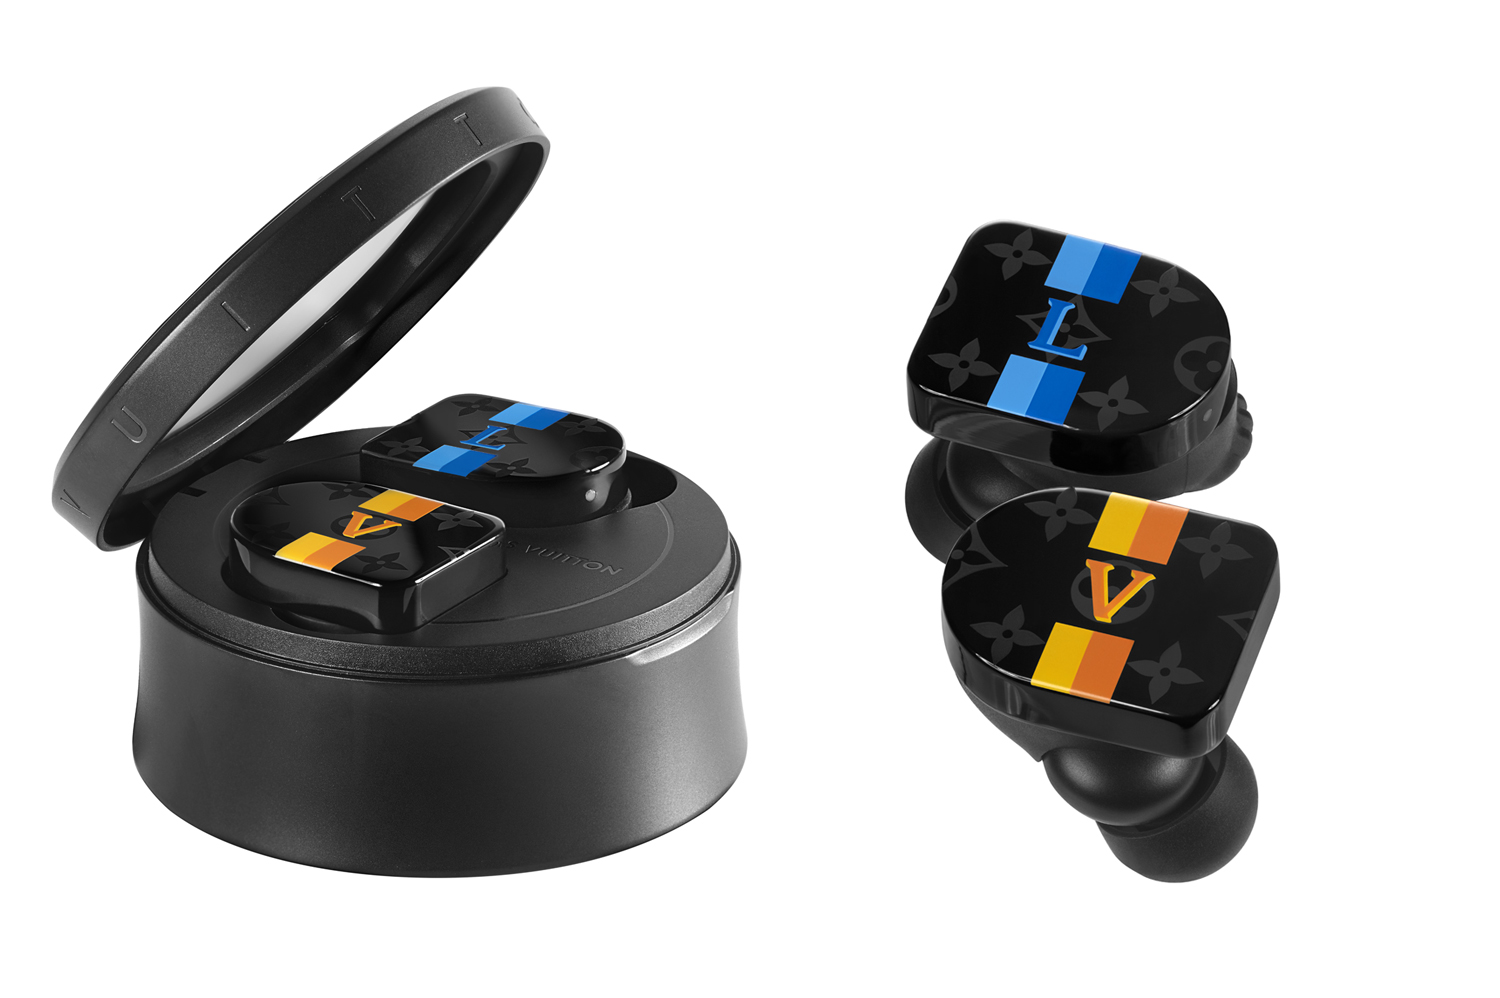 Master & Dynamic Louis Vuitton Horizon: Earbuds in blue and orange stripes on black background. The left side of the image shows the earbuds in the cylindrical, black charging case.